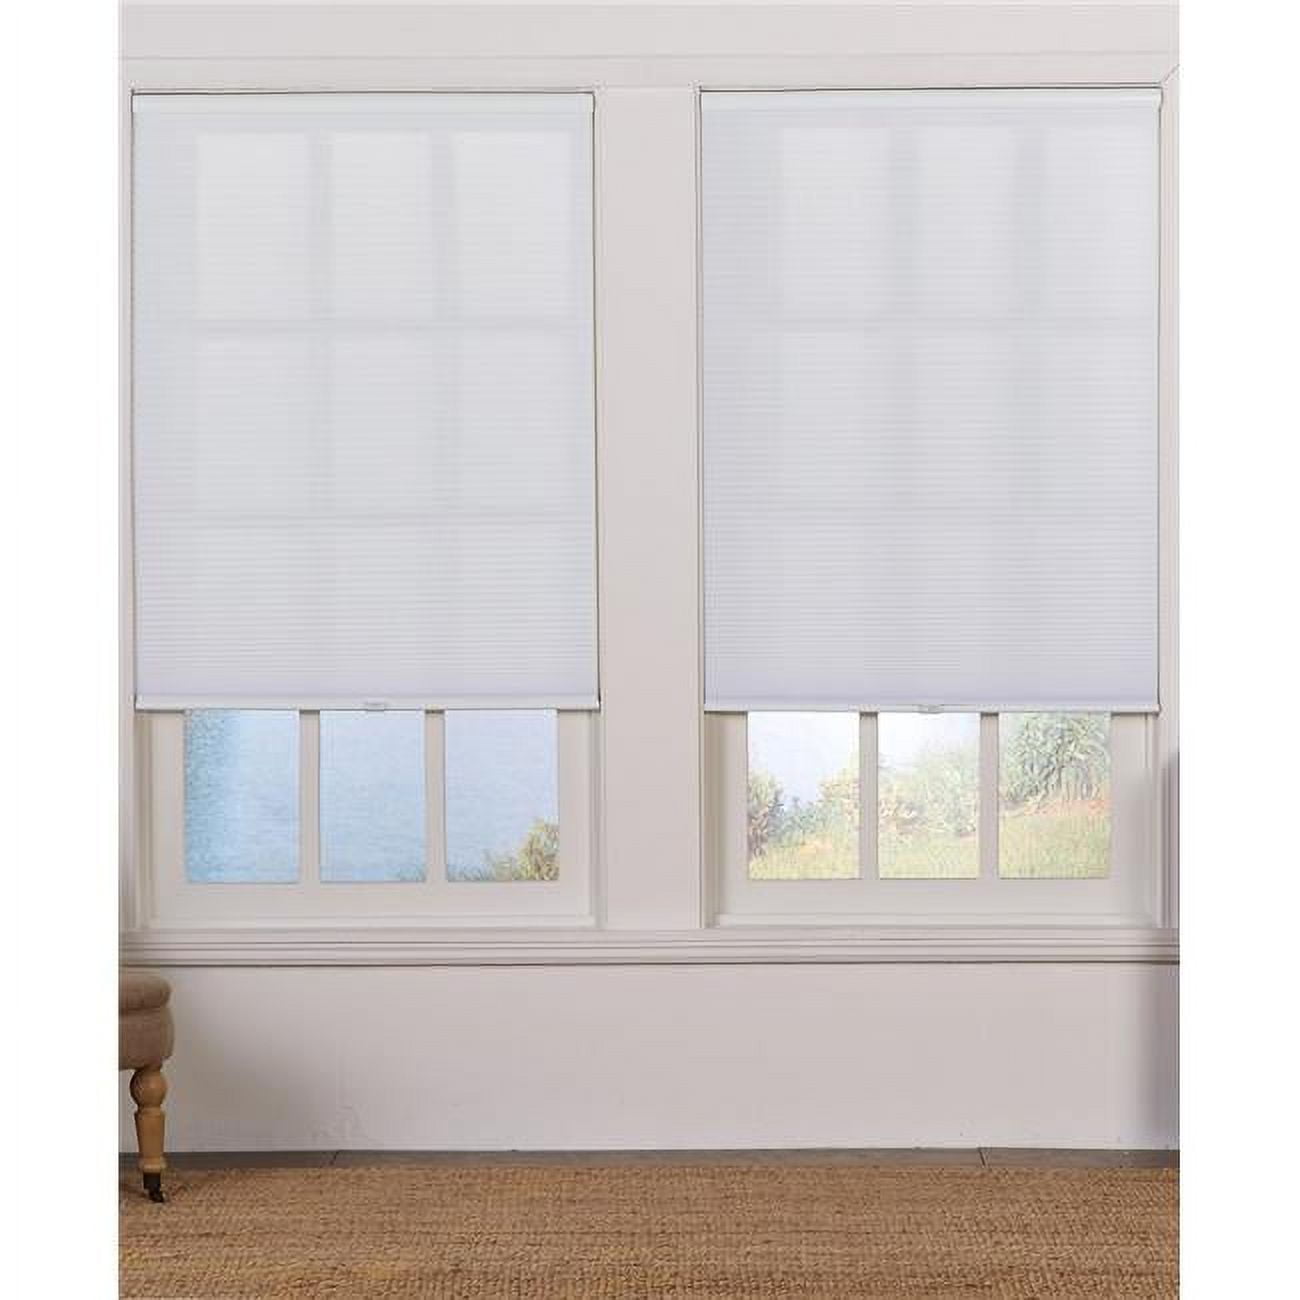 Ubc31x48wt Cordless Light Filtering Cellular Shade, White - 31 X 48 In.